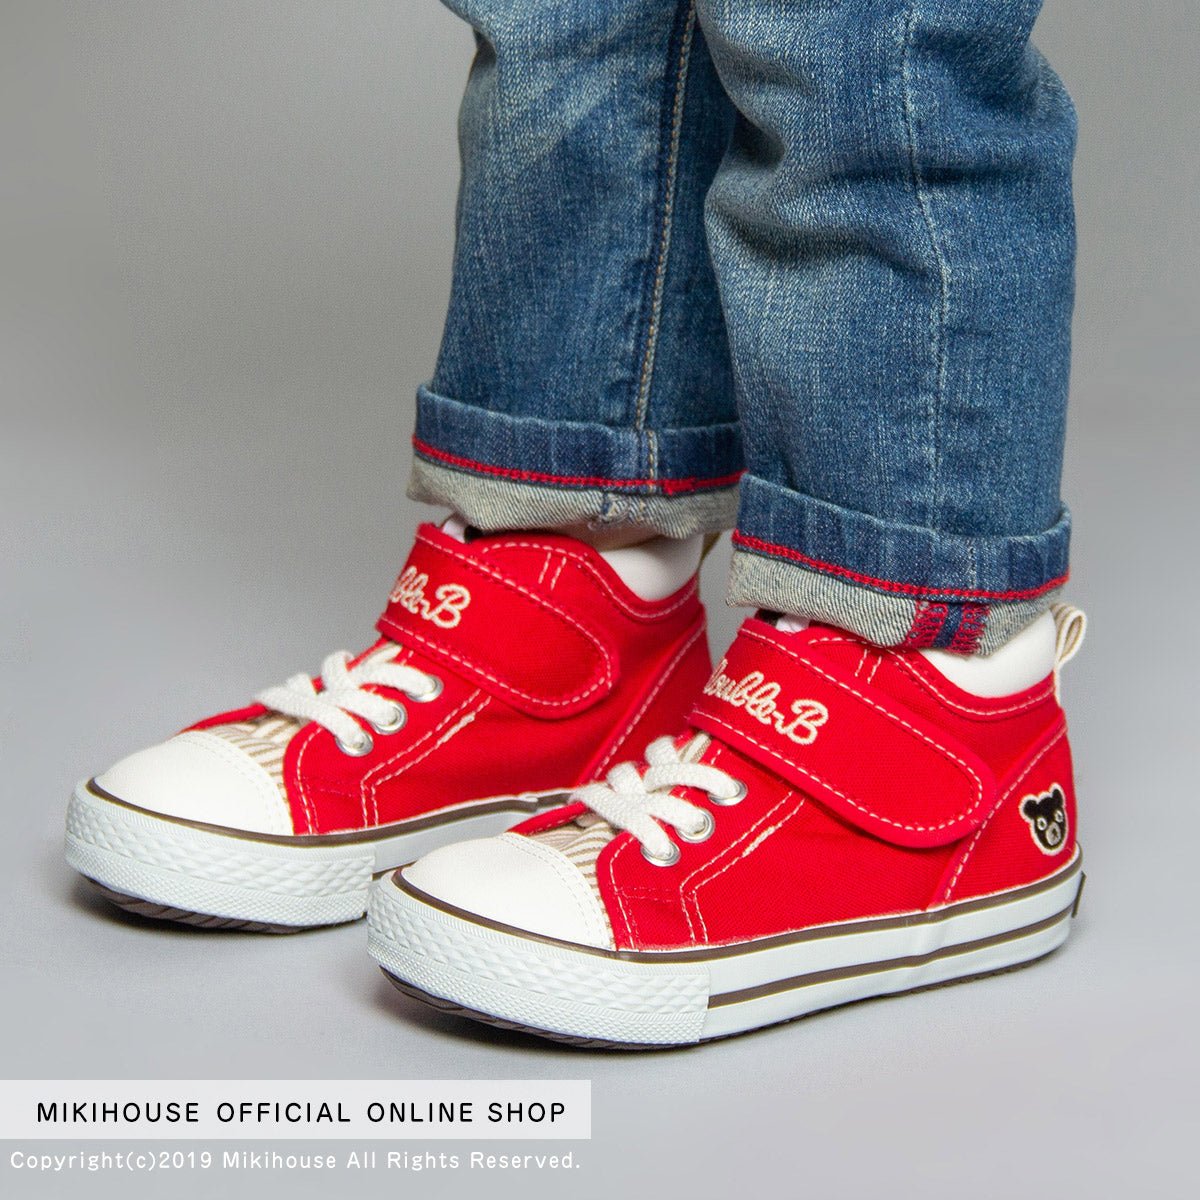 DOUBLE_B High Top Shoes for Kids - Street Style - 63-9401-261-33-16